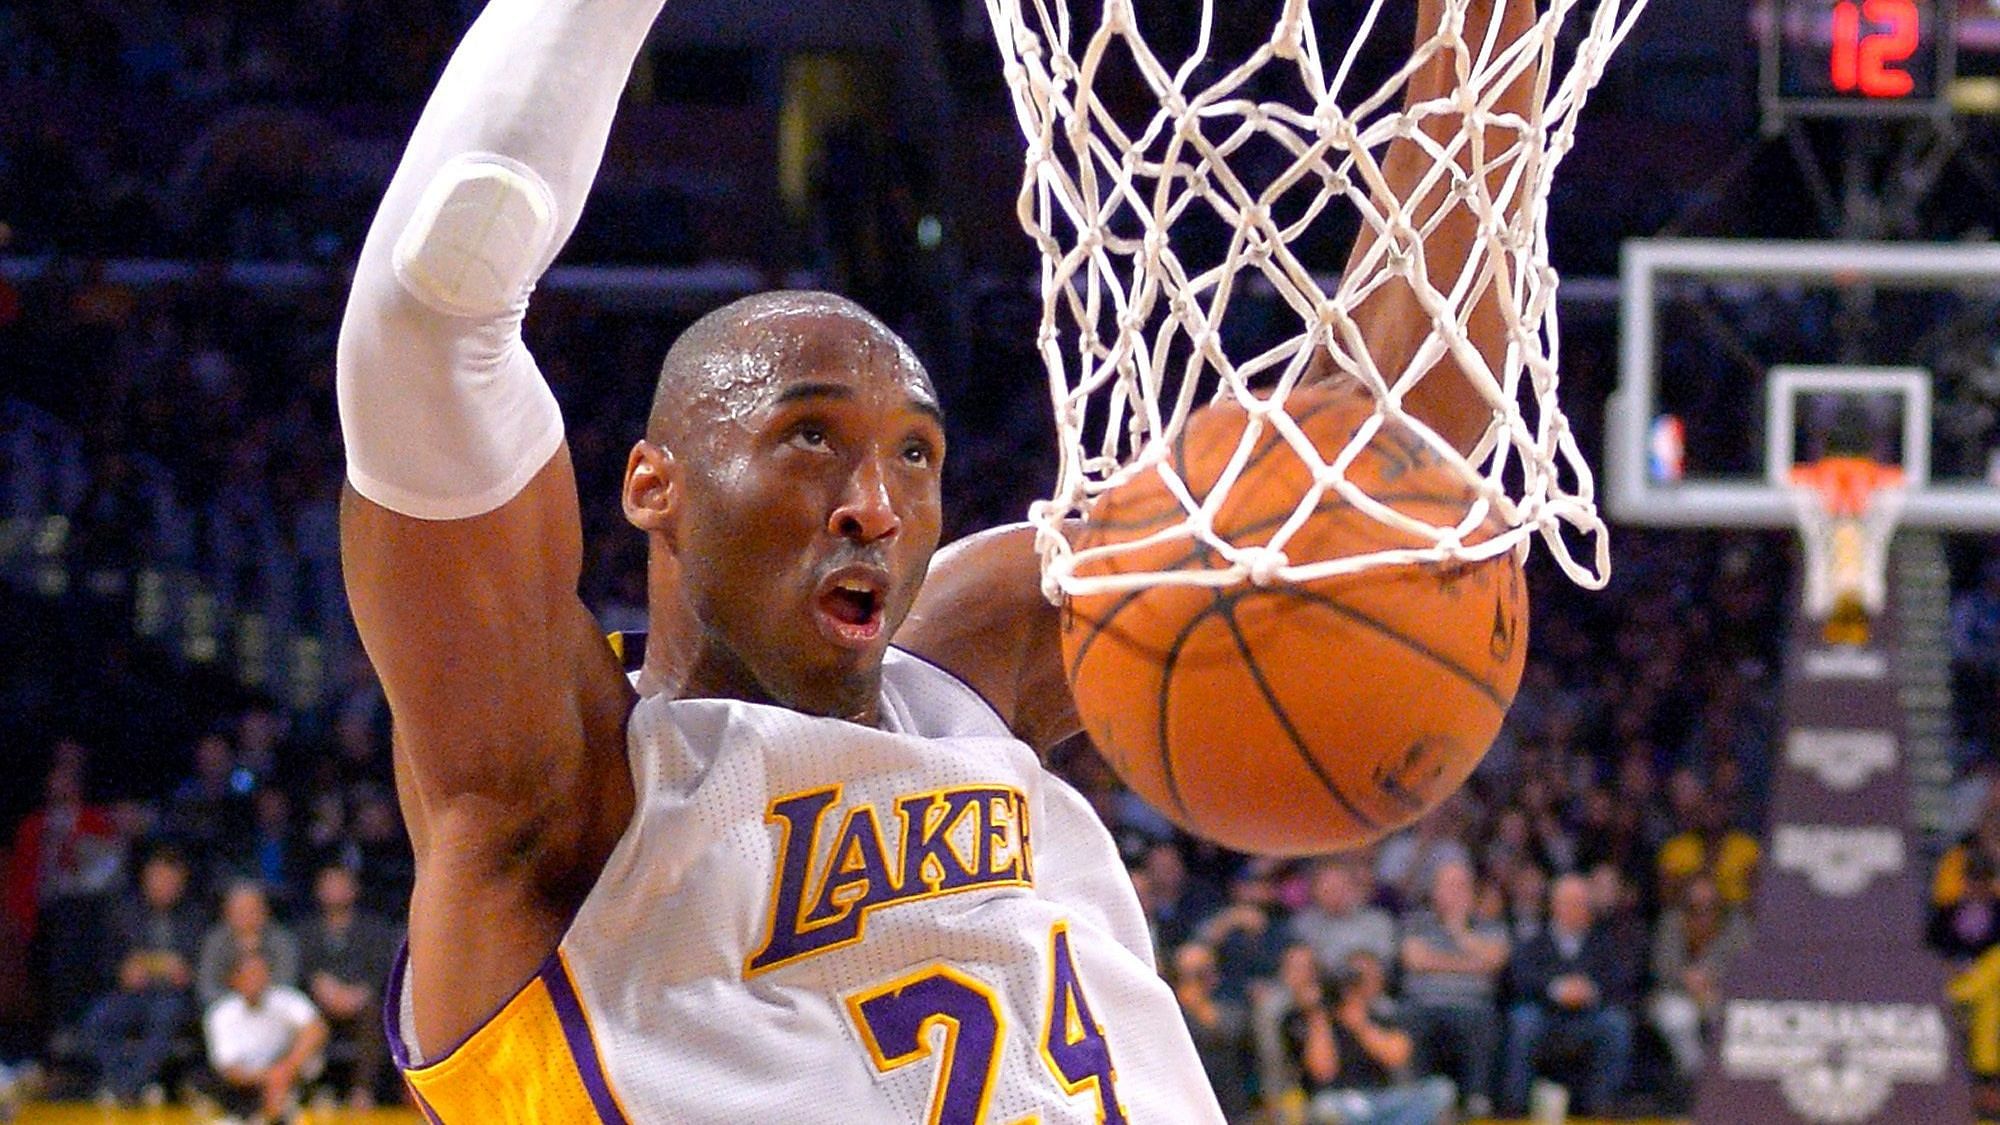 Kobe Bryant, along with his daughter Gianna, died in a helicopter crash in California on Sunday, 26 January.